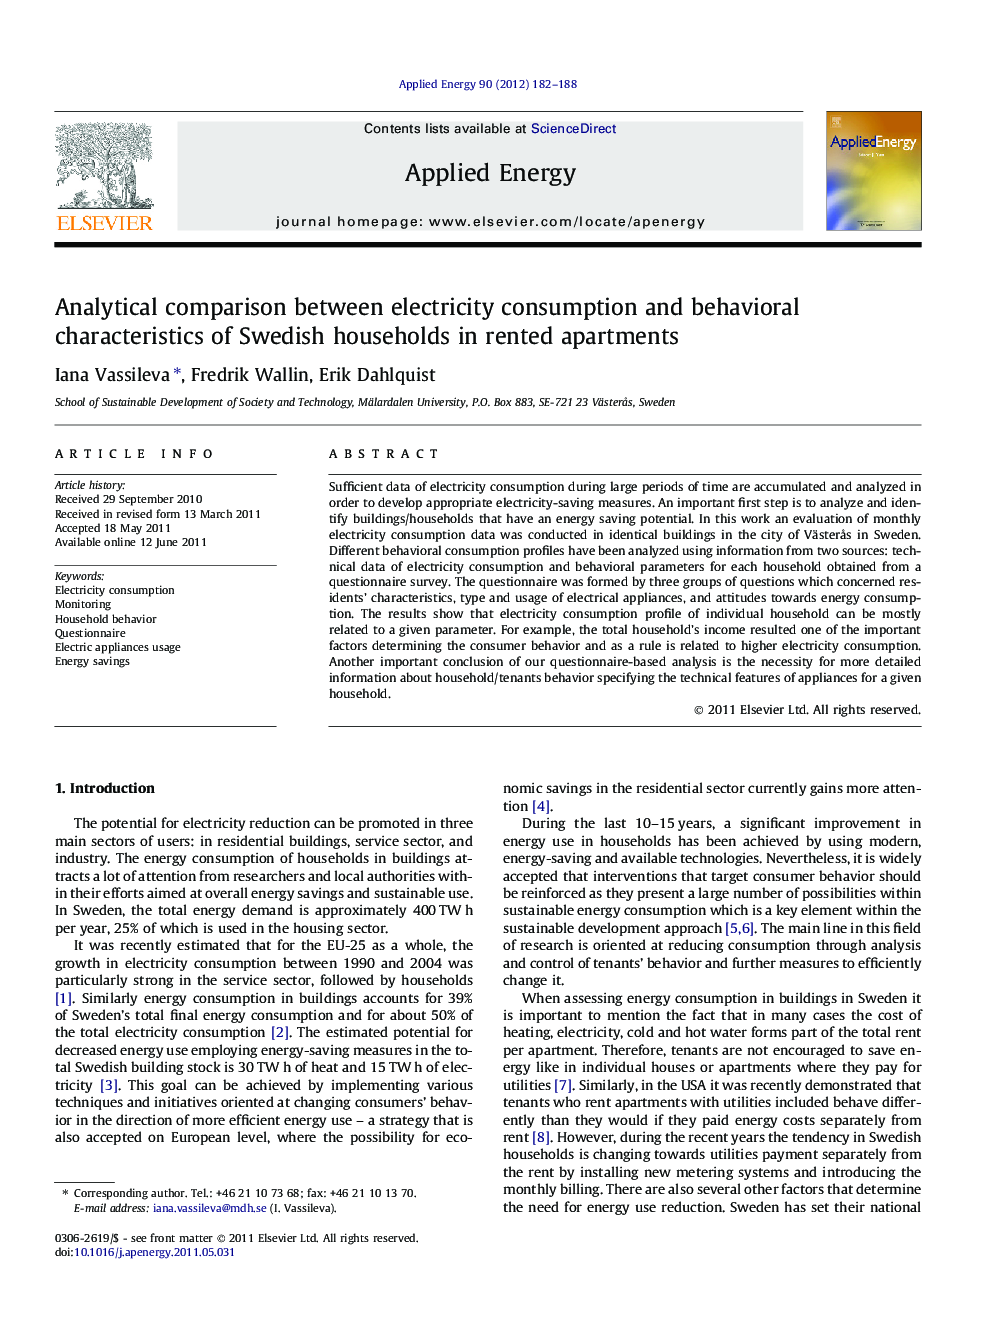 Analytical comparison between electricity consumption and behavioral characteristics of Swedish households in rented apartments